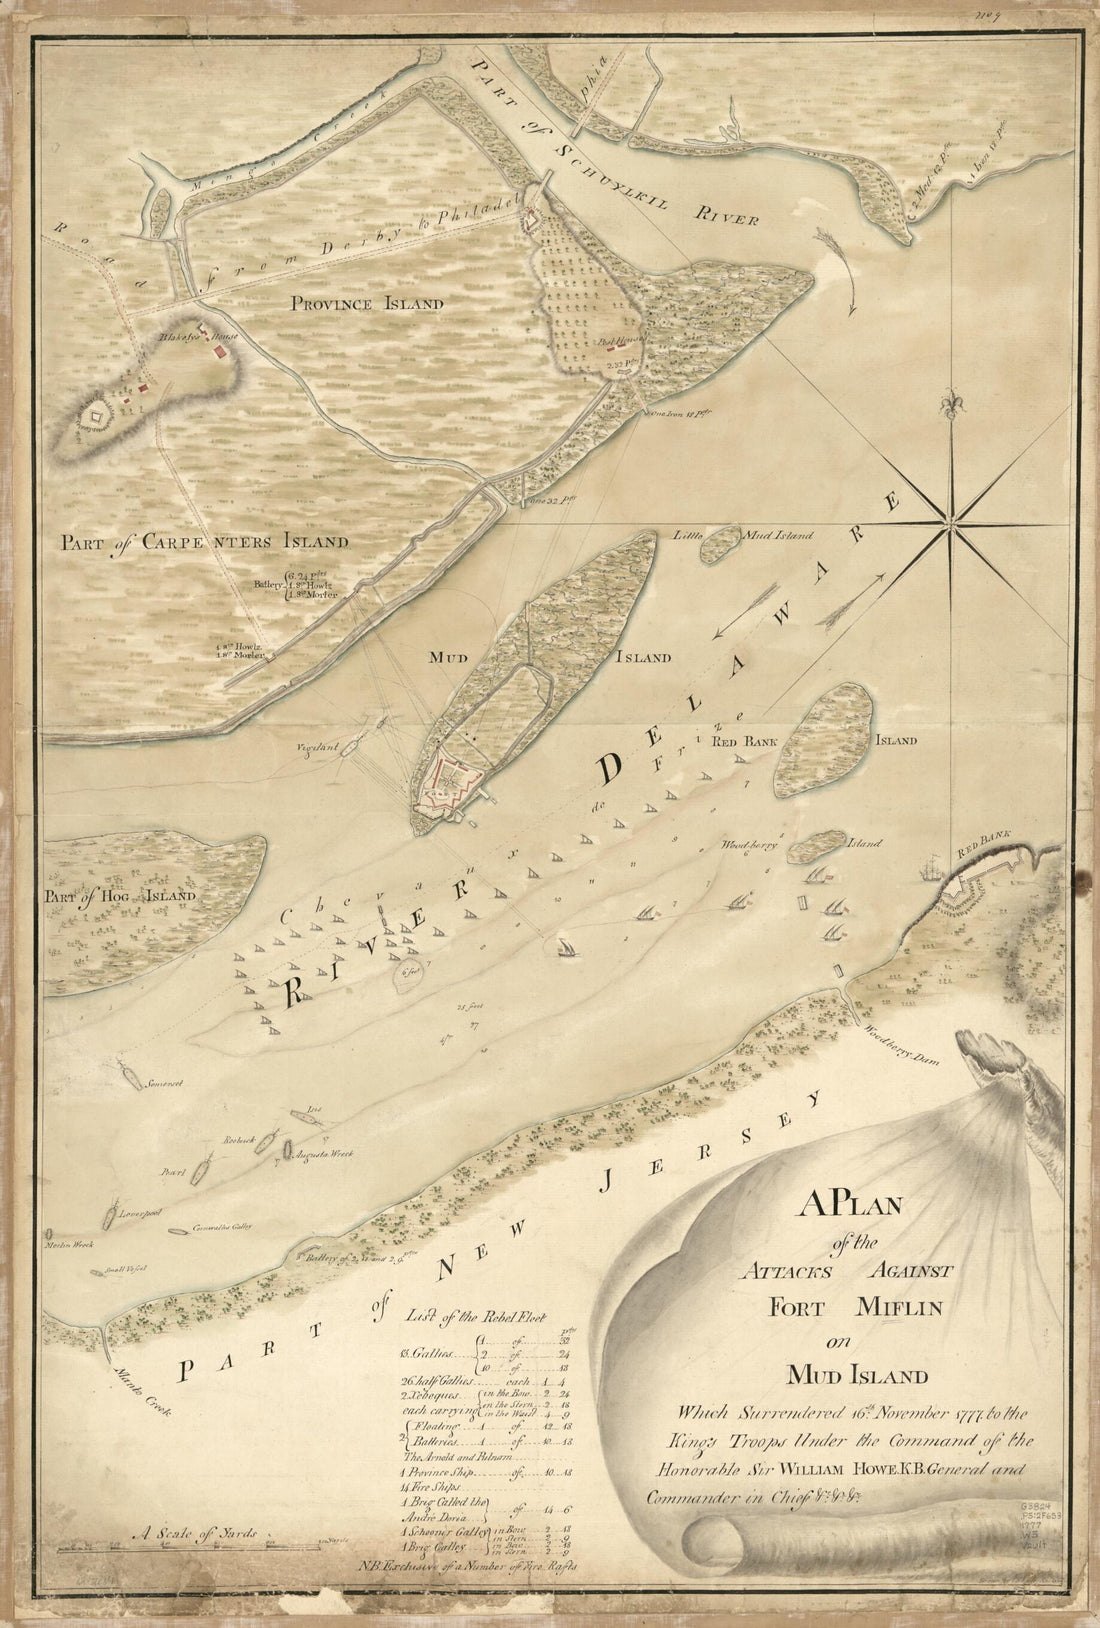 This old map of A Plan of the Attacks Against Fort Miflin On Mud Island Which Surrendered 16th, November from 1777 to the Kings Troops Under the Command of the Honorable Sir William Howe K.B. General and Commander In Chief &amp;c., &amp;c was created by Thomas W